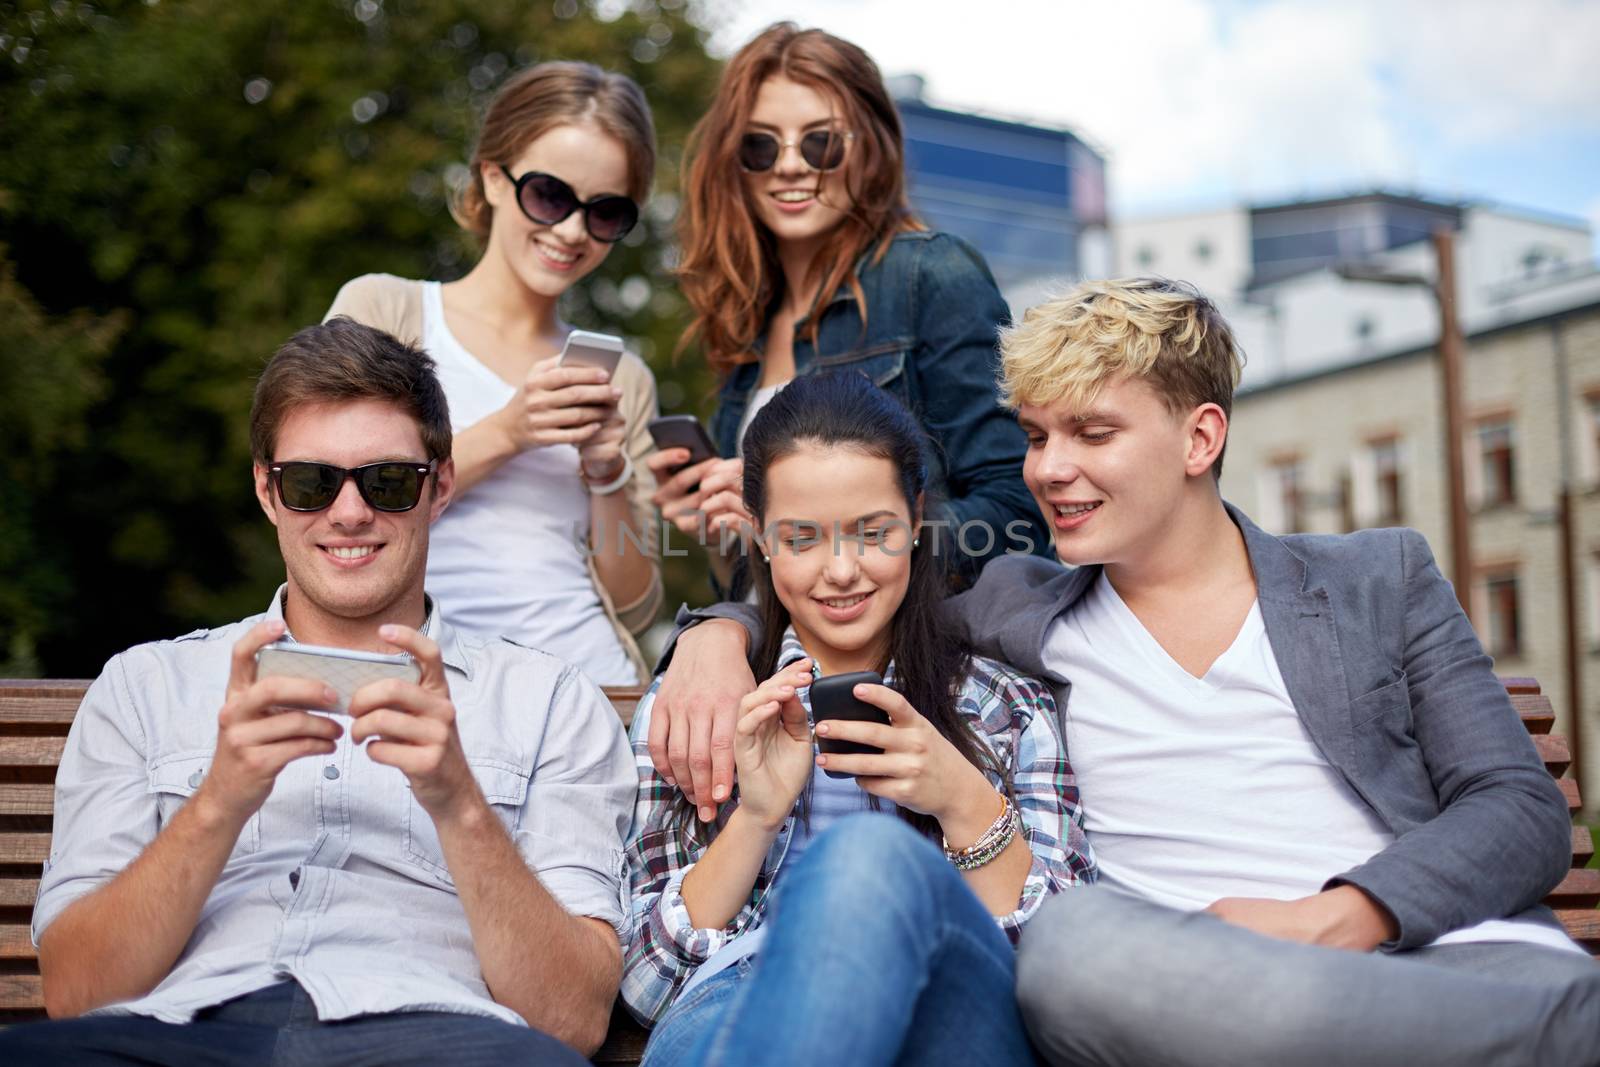 summer, technology, education and teenage concept - group of happy students or teenagers with smarphones taking selfie and texting messages at campus